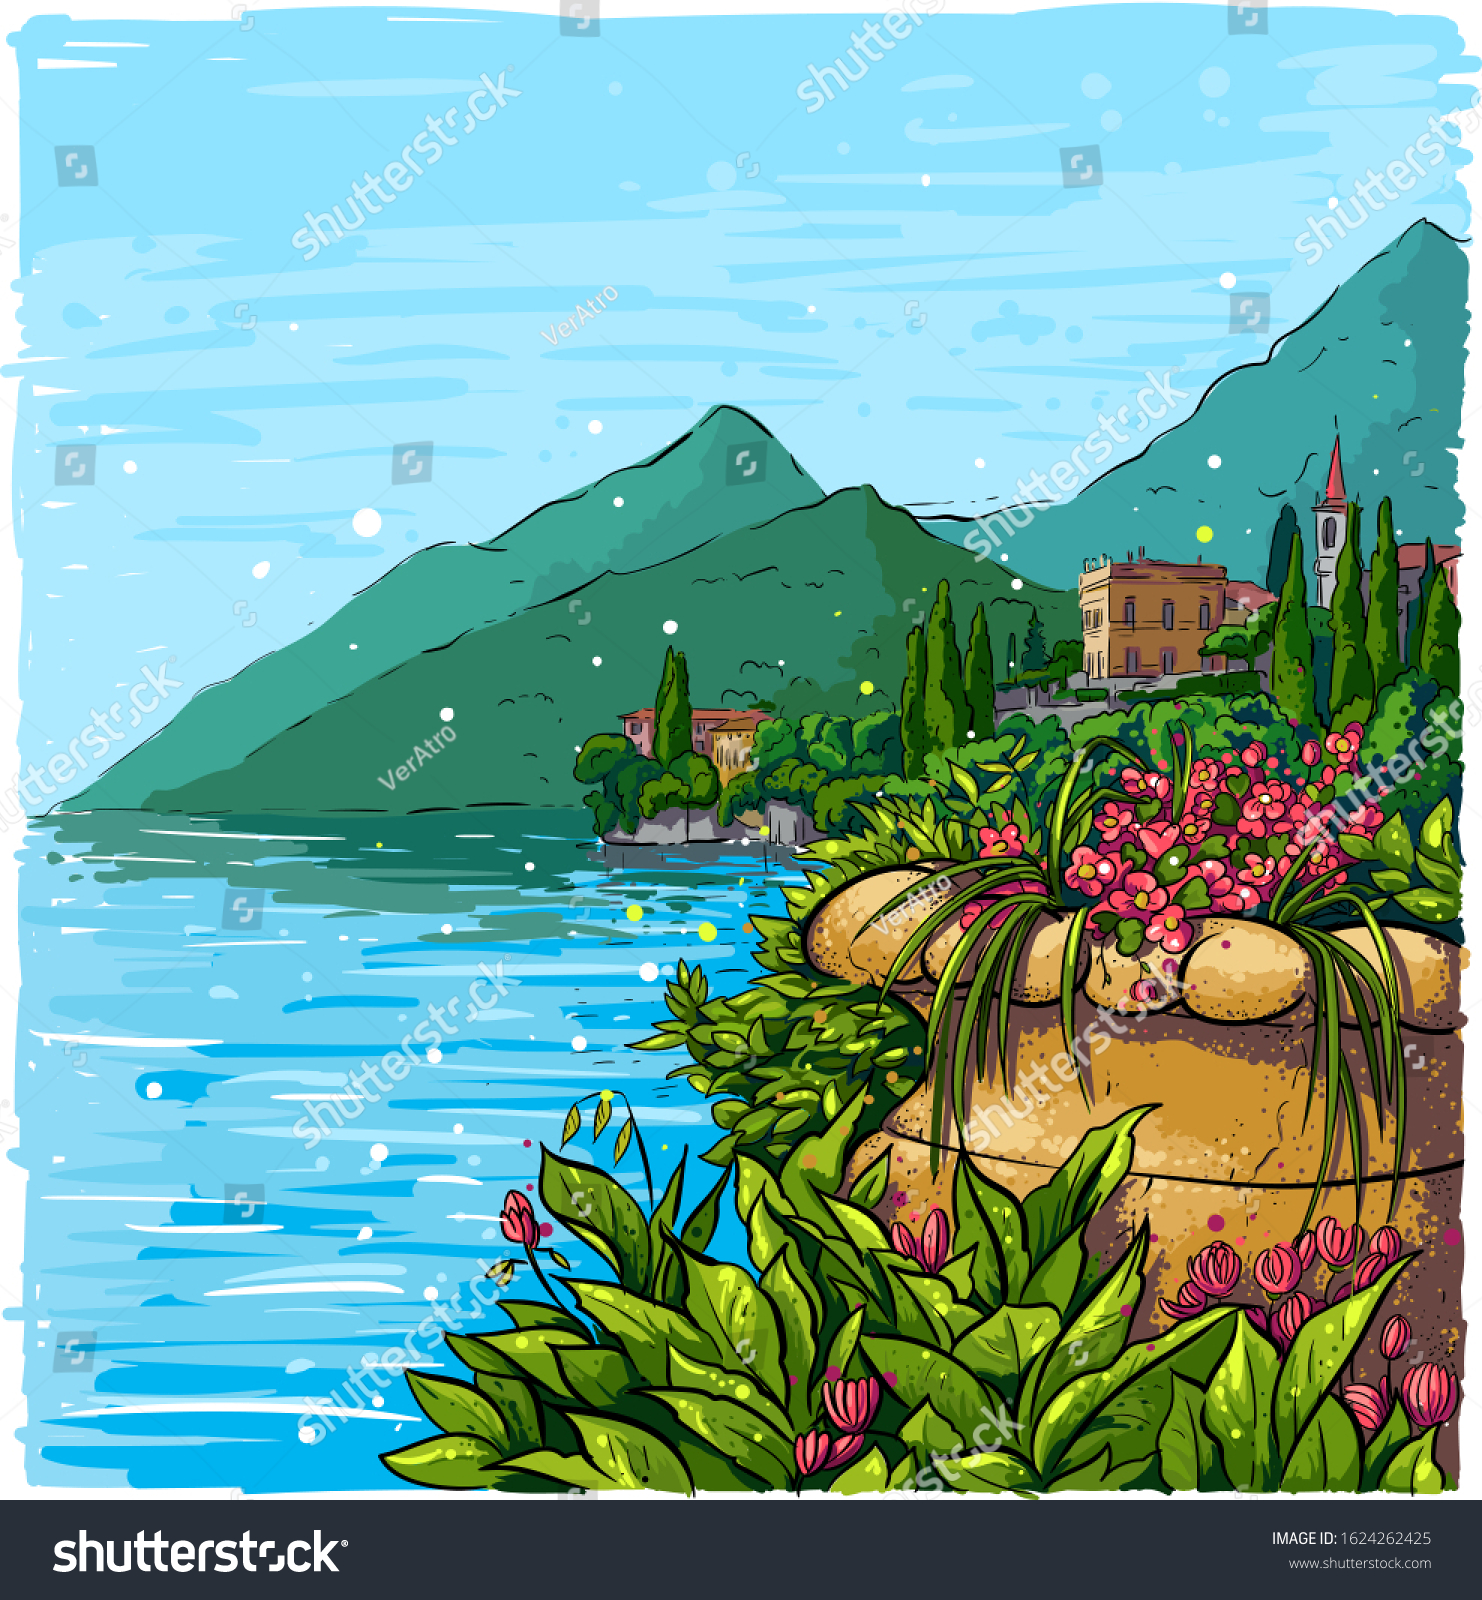 SVG of Italian landscape background with villas and cypresses. Como lake romantic sketch illustration. svg